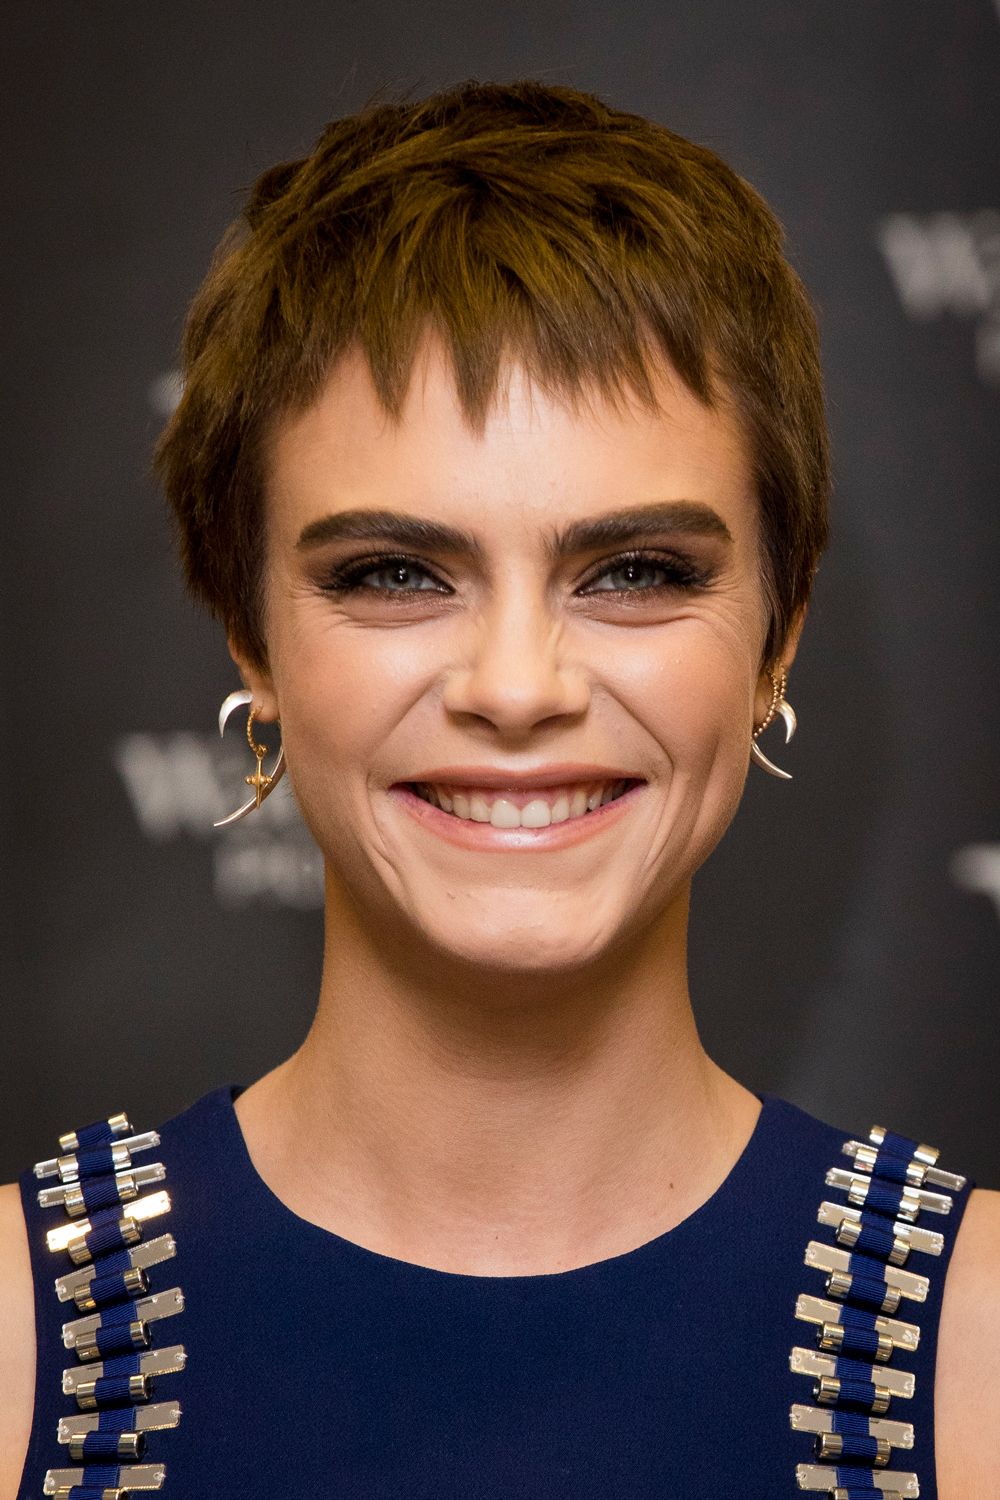 Pixie Cuts For 2020 34 Celebrity Hairstyle Ideas For Women